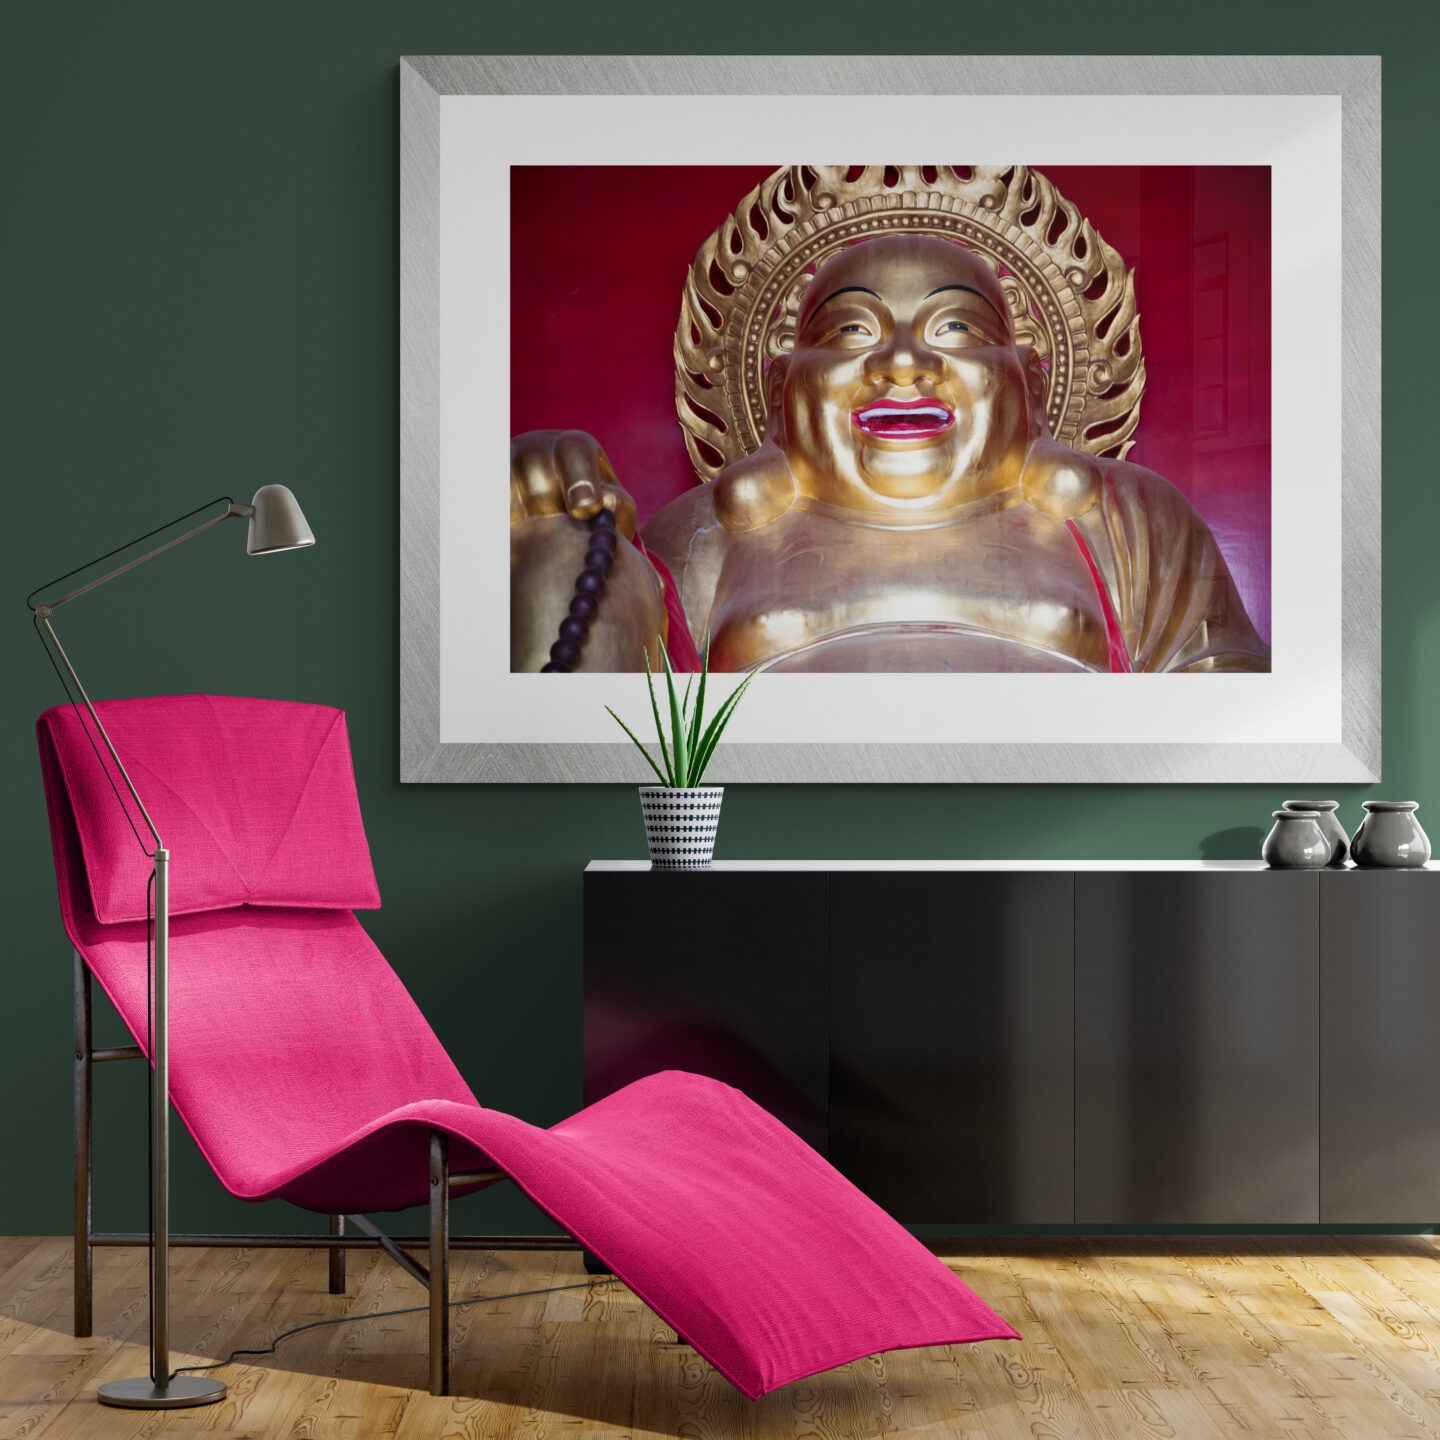 Room with a view- a bright pink chair with fine art print of "Golden Buddha" by Carol Schiraldi of Carol's Little World showcased to create an inspiring interior